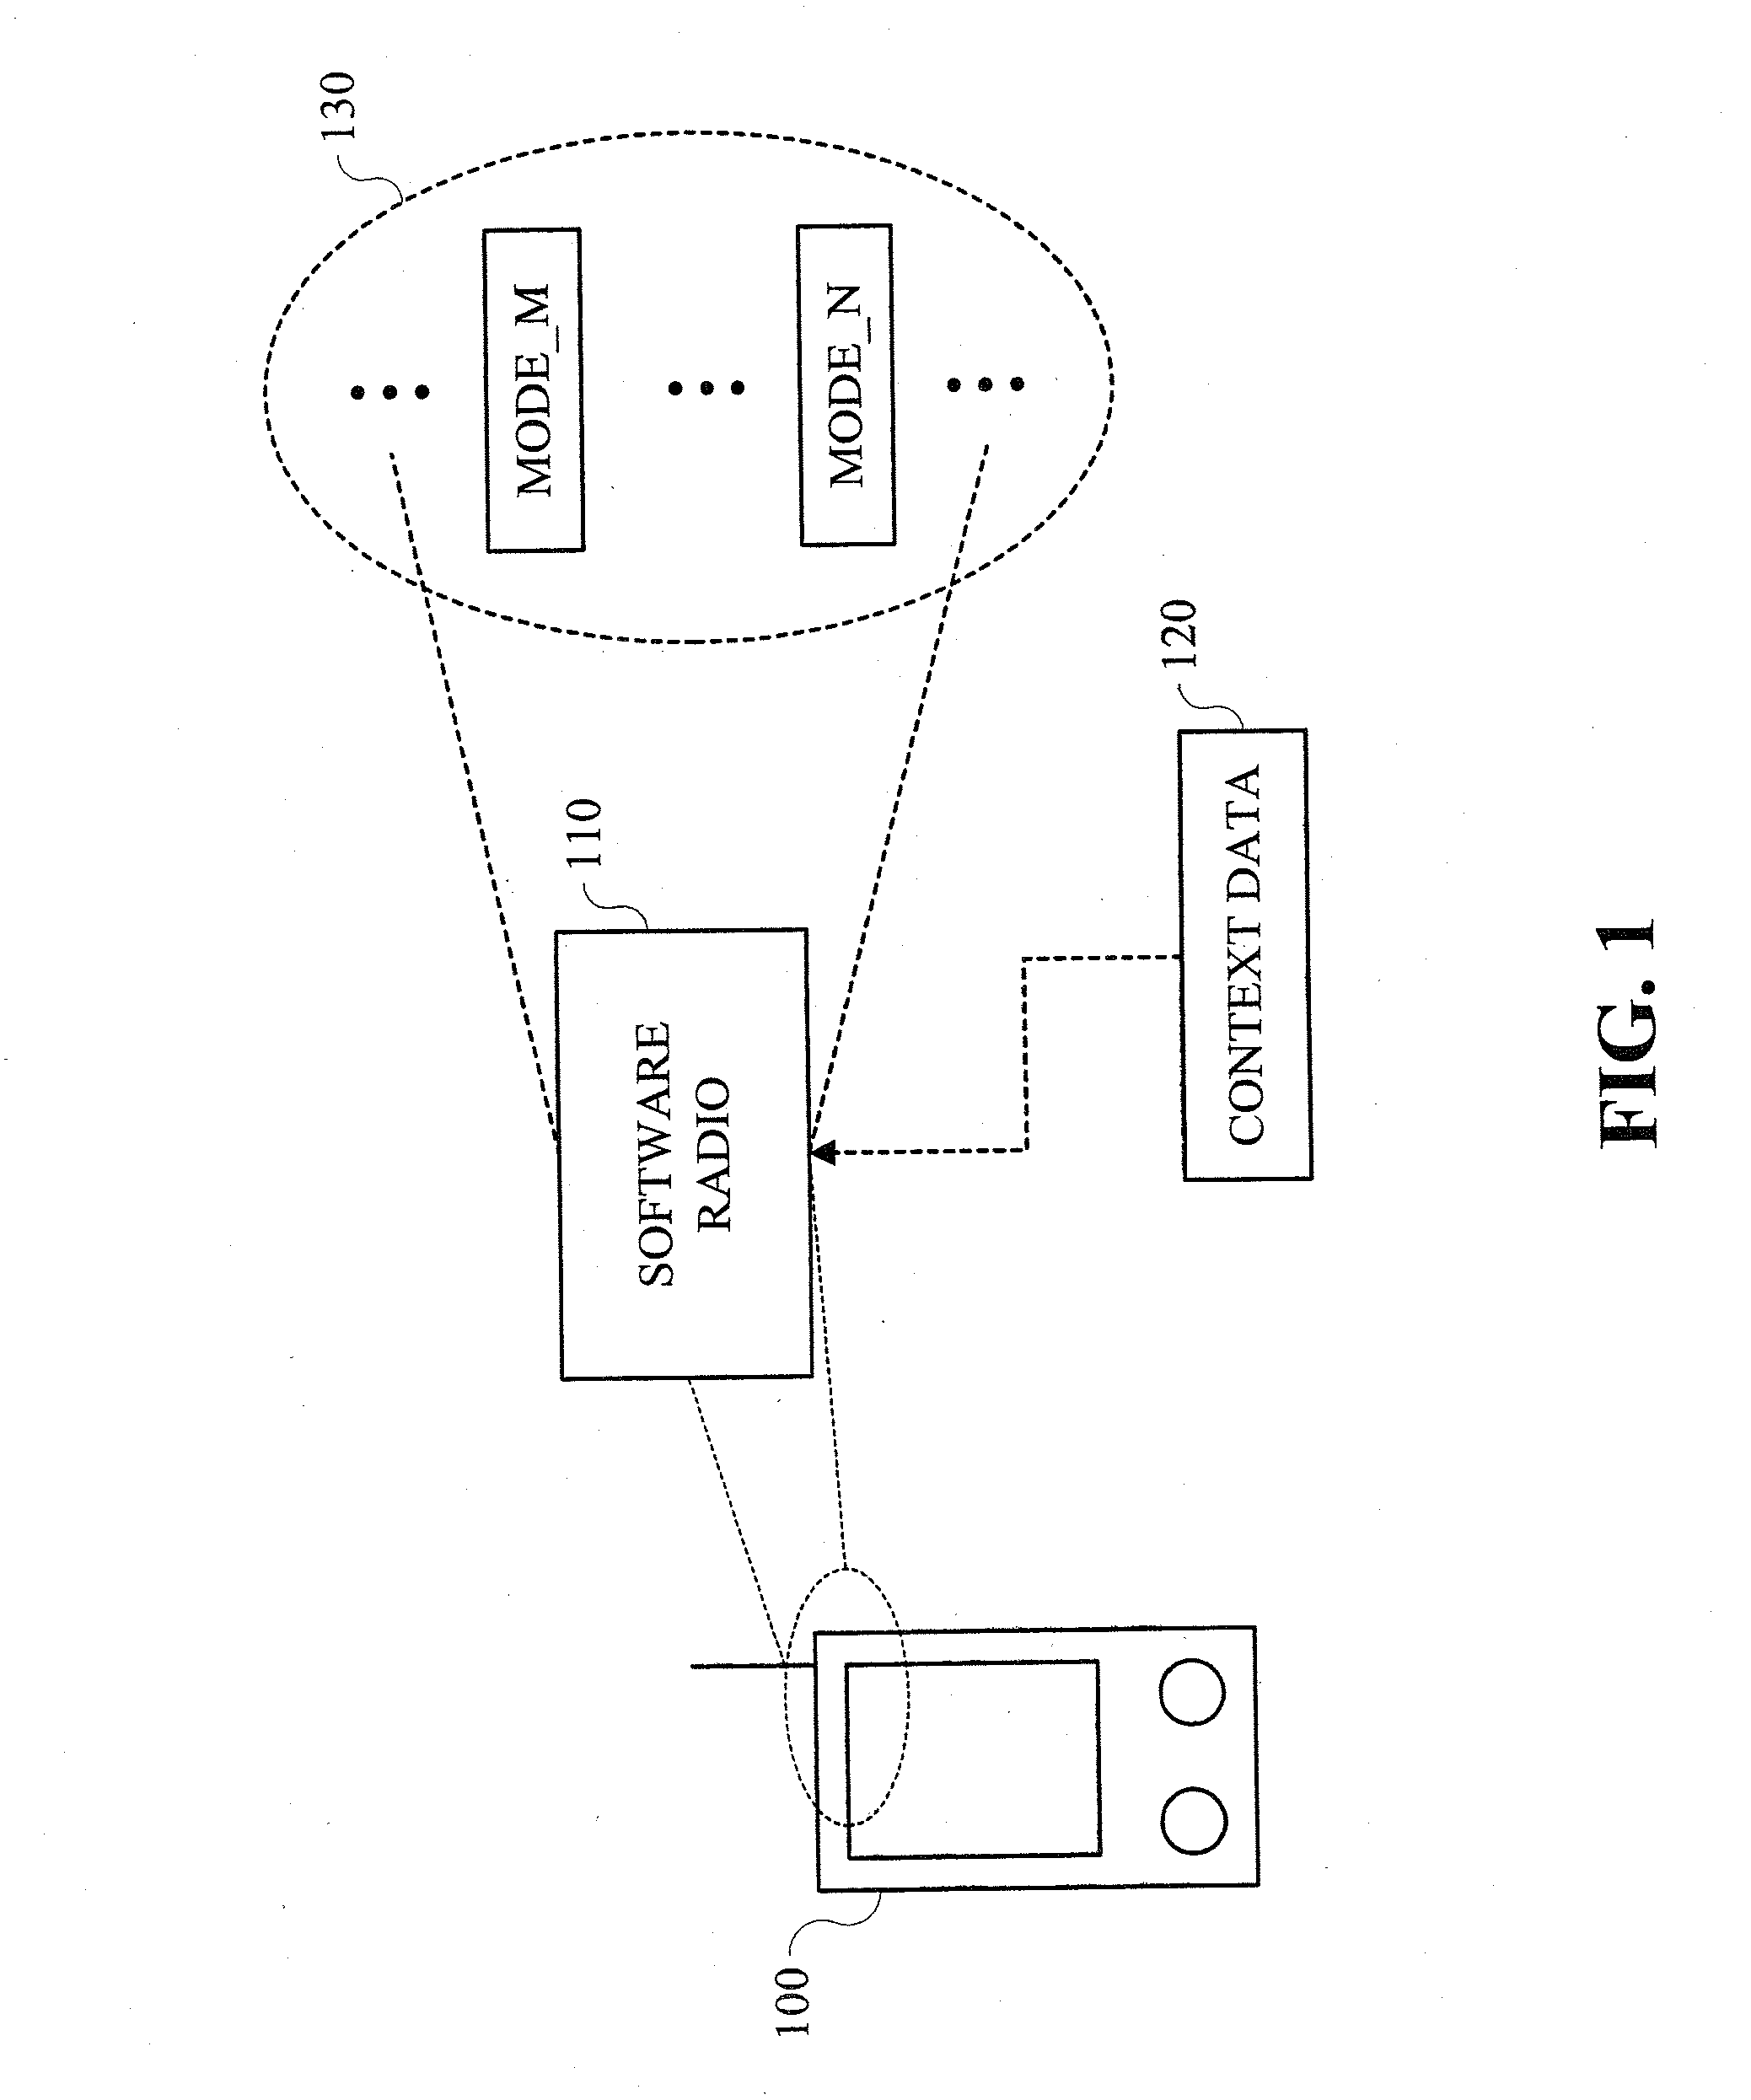 Method and Apparatus for Preconditioning Mobile Devices for Network and Other Operations